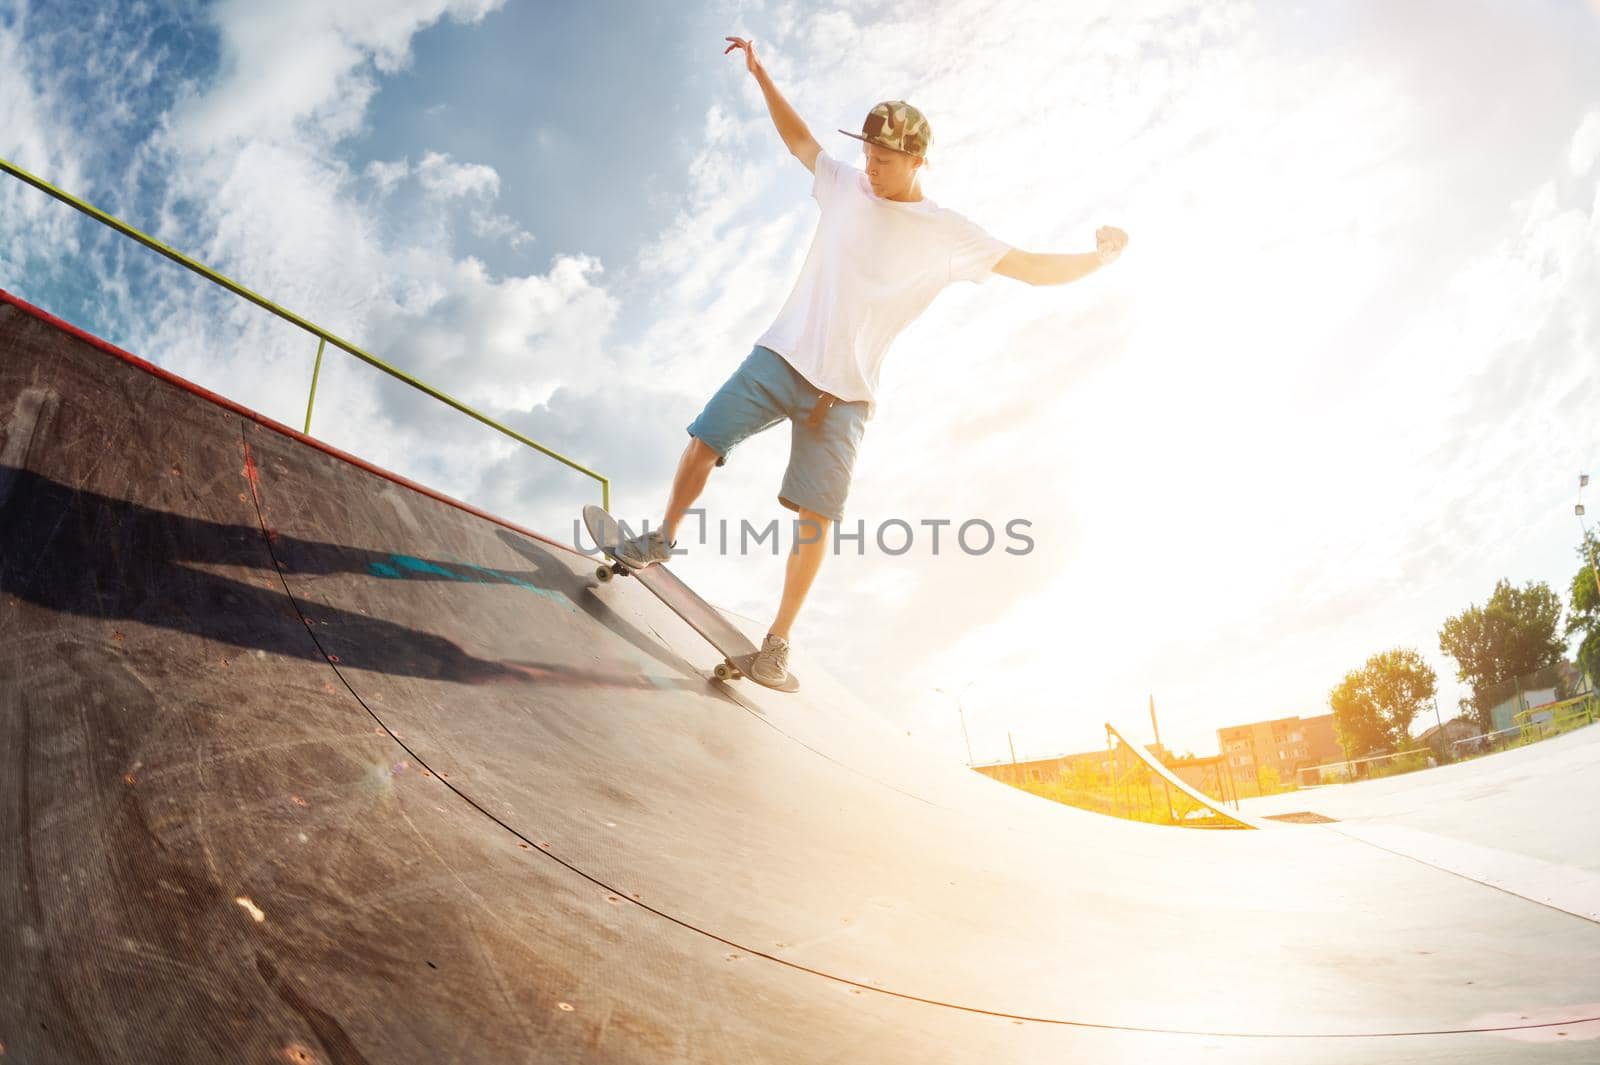 Portrait of a young skateboarder doing a trick on his skateboard on a halfpipe ramp in a skate park in the summer on a sunny day. The concept of youth culture of leisure and sports.